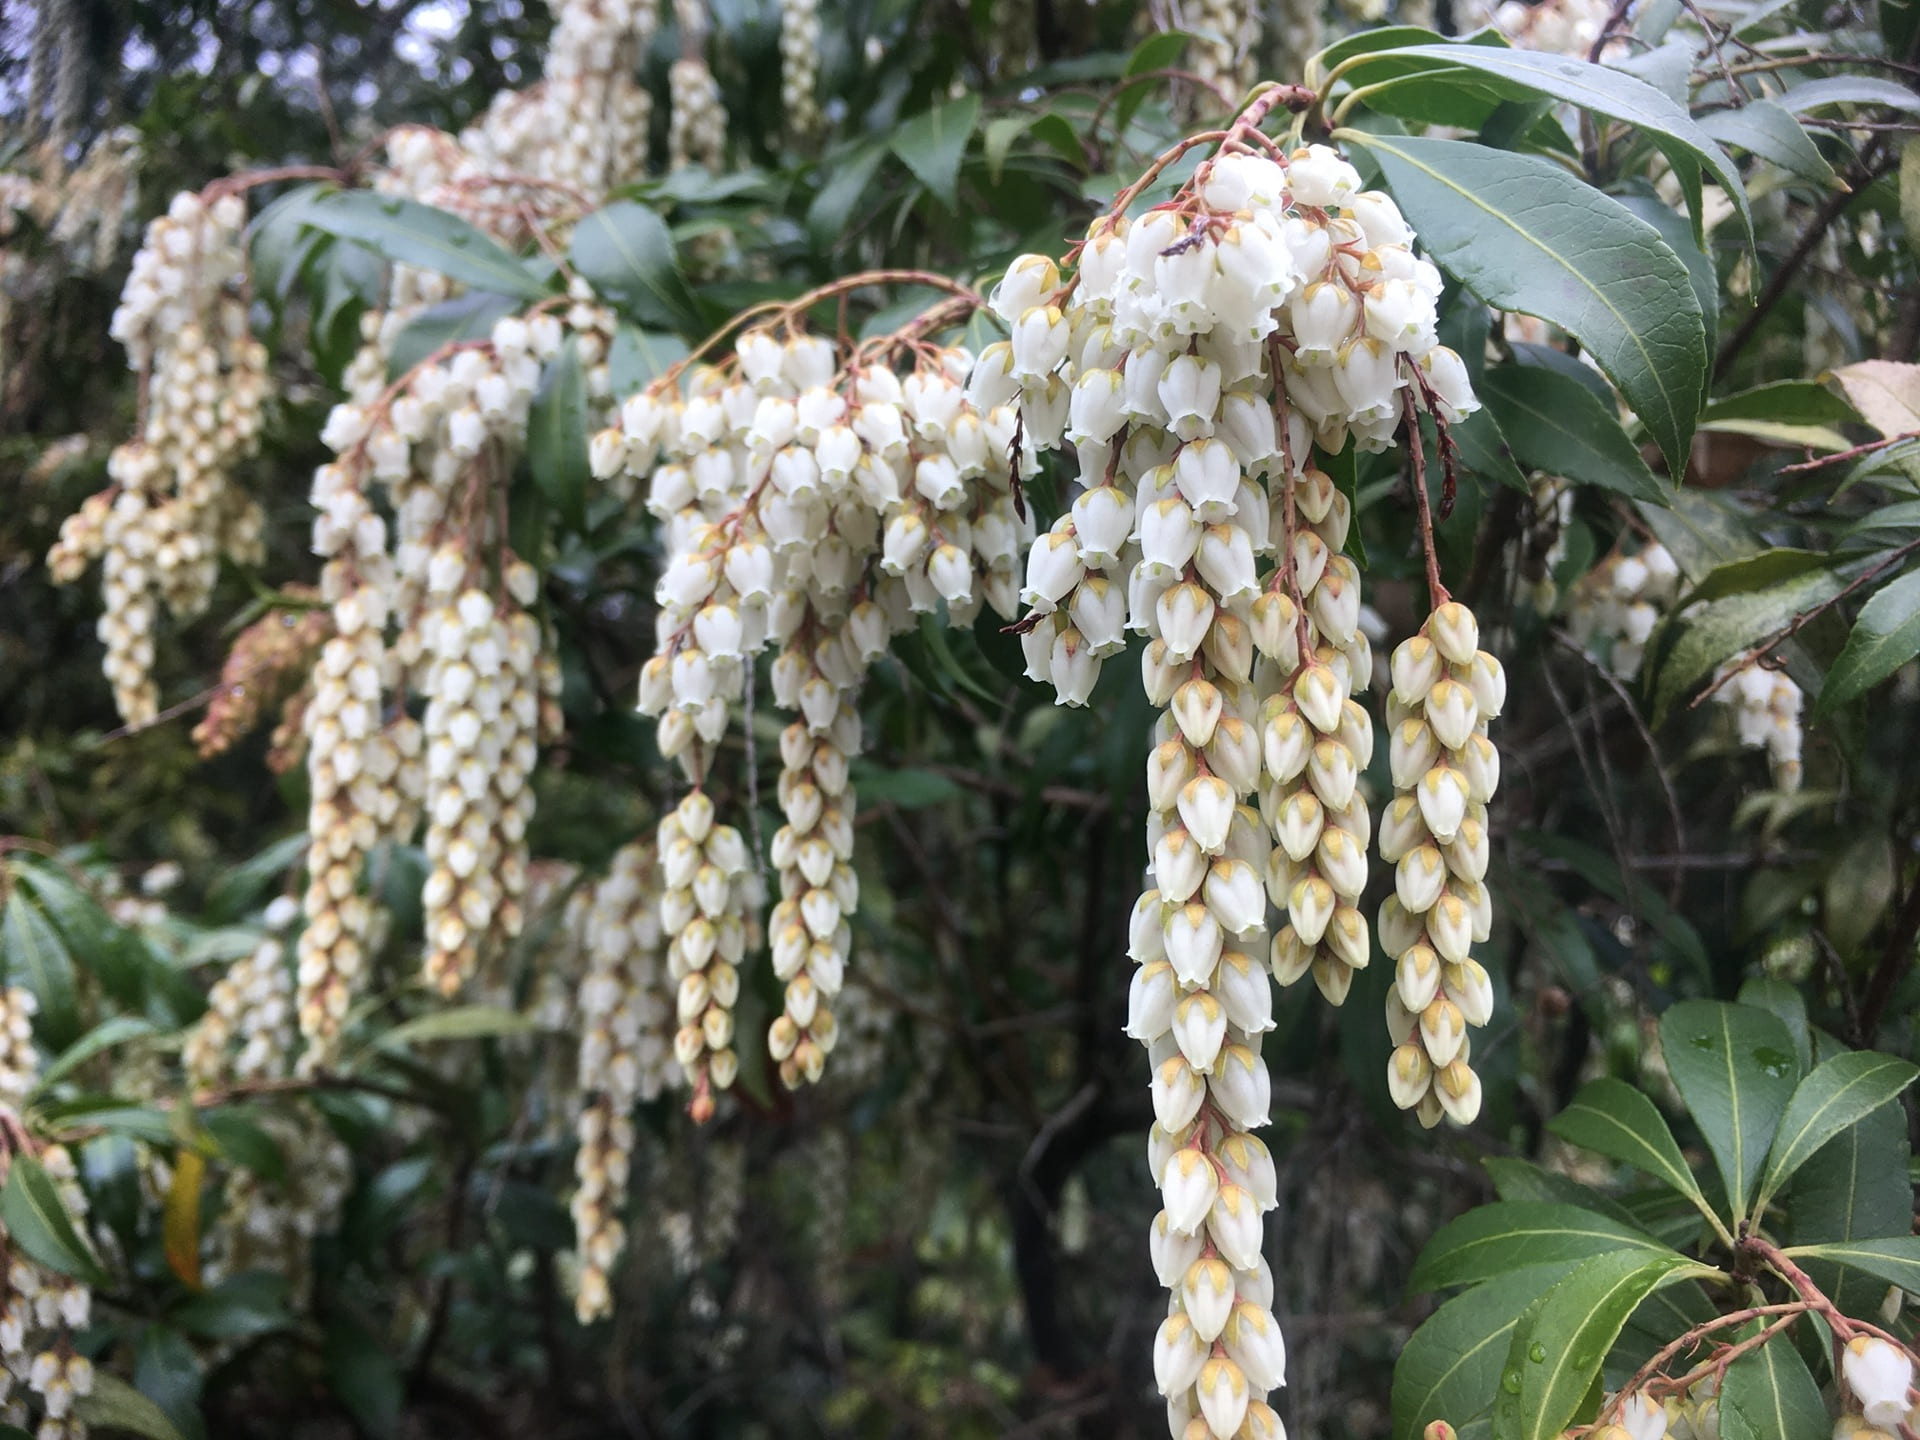 The bell-shaped flowers of Pieris japonica's are typical for its taxonomic family, the heath family (Ericaceae).